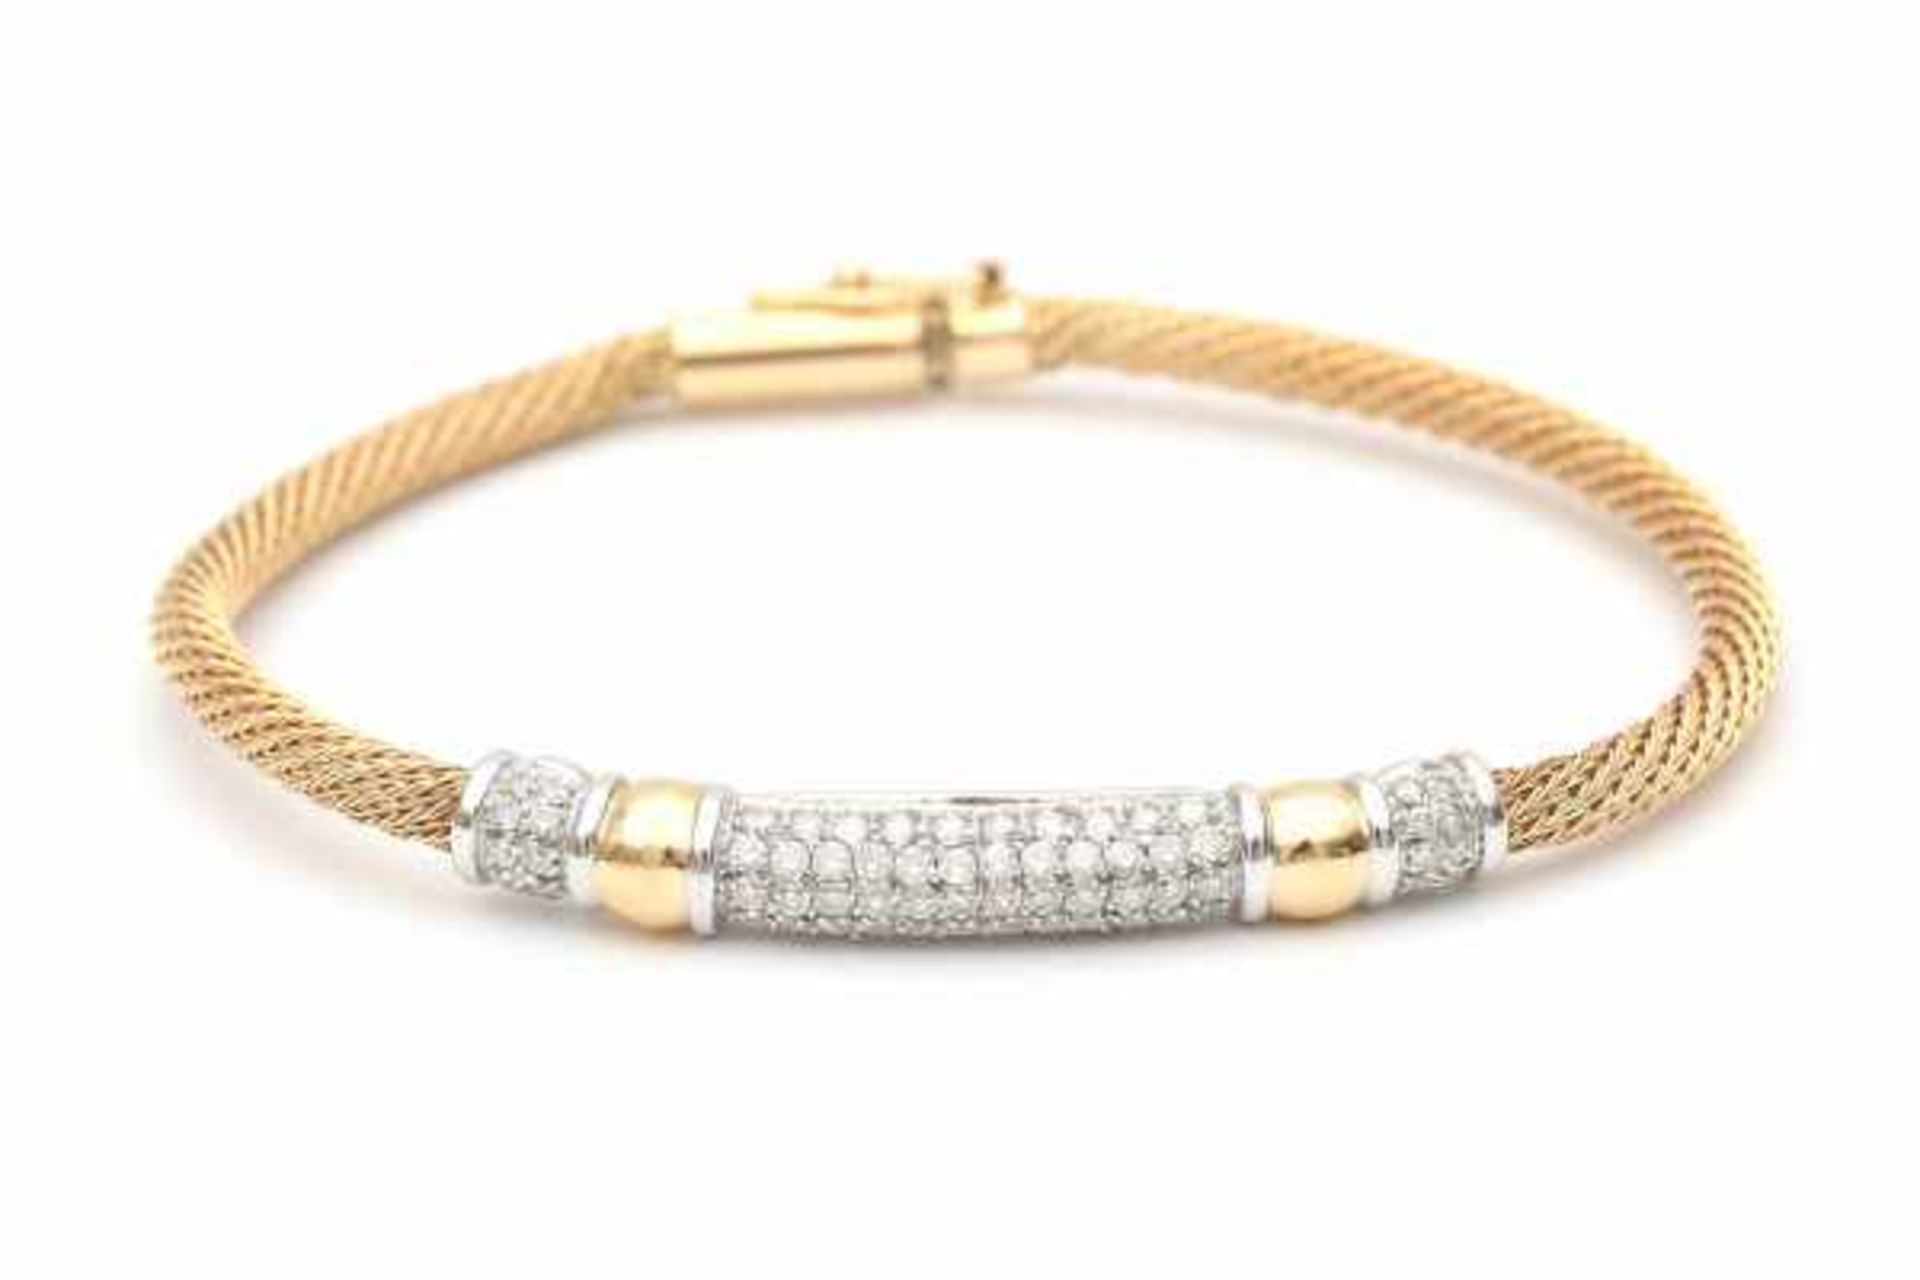 A yellow and white gold braided bracelet, its center is set with pavé cut diamonds, total ca. 0.51